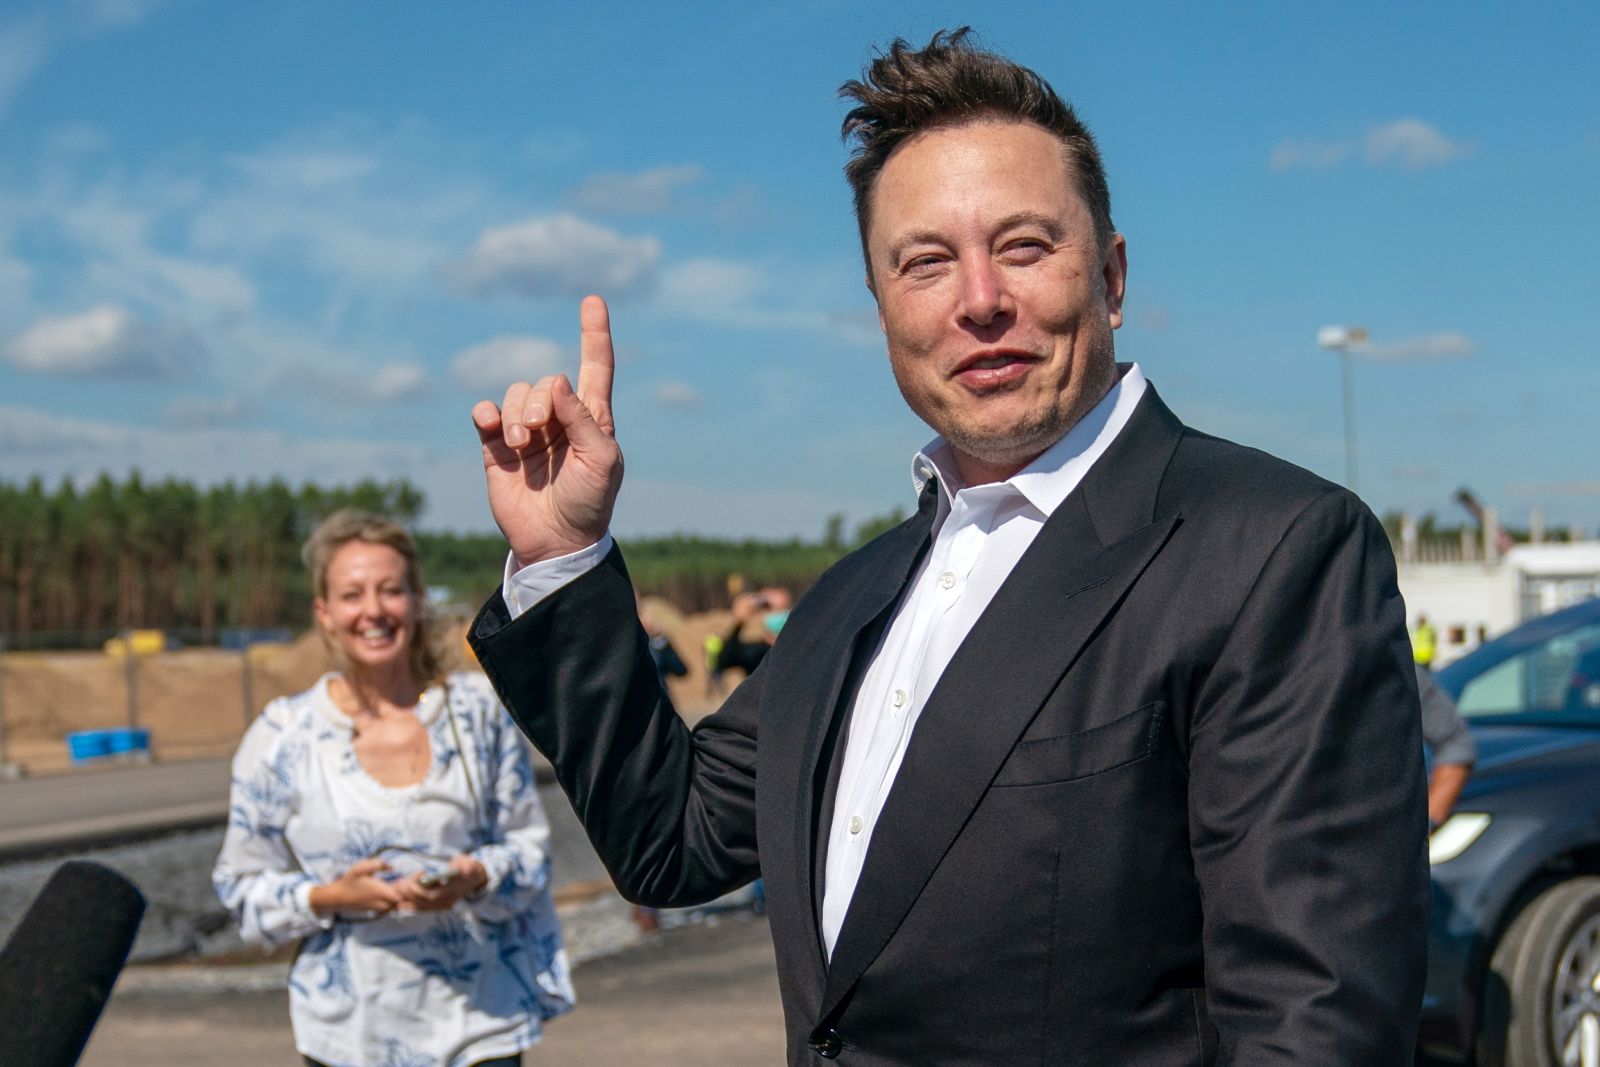 epa09889607 (FILE) - Tesla and SpaceX CEO Elon Musk gives a statement at the construction site of the Tesla Giga Factory in Gruenheide near Berlin, Germany, 03 September 2020 (reissued 14 April 2022). A statement published by the US Securities and Exchange Commission (SEC) on 14 April 2022 reads that Elon Musk has filed a proposal to acquire all available Twitter shares at a price of 54.20 US dollars per share, an offer that would total in 43.4 billion USD of company value.  EPA/ALEXANDER BECHER *** Local Caption *** 56315886